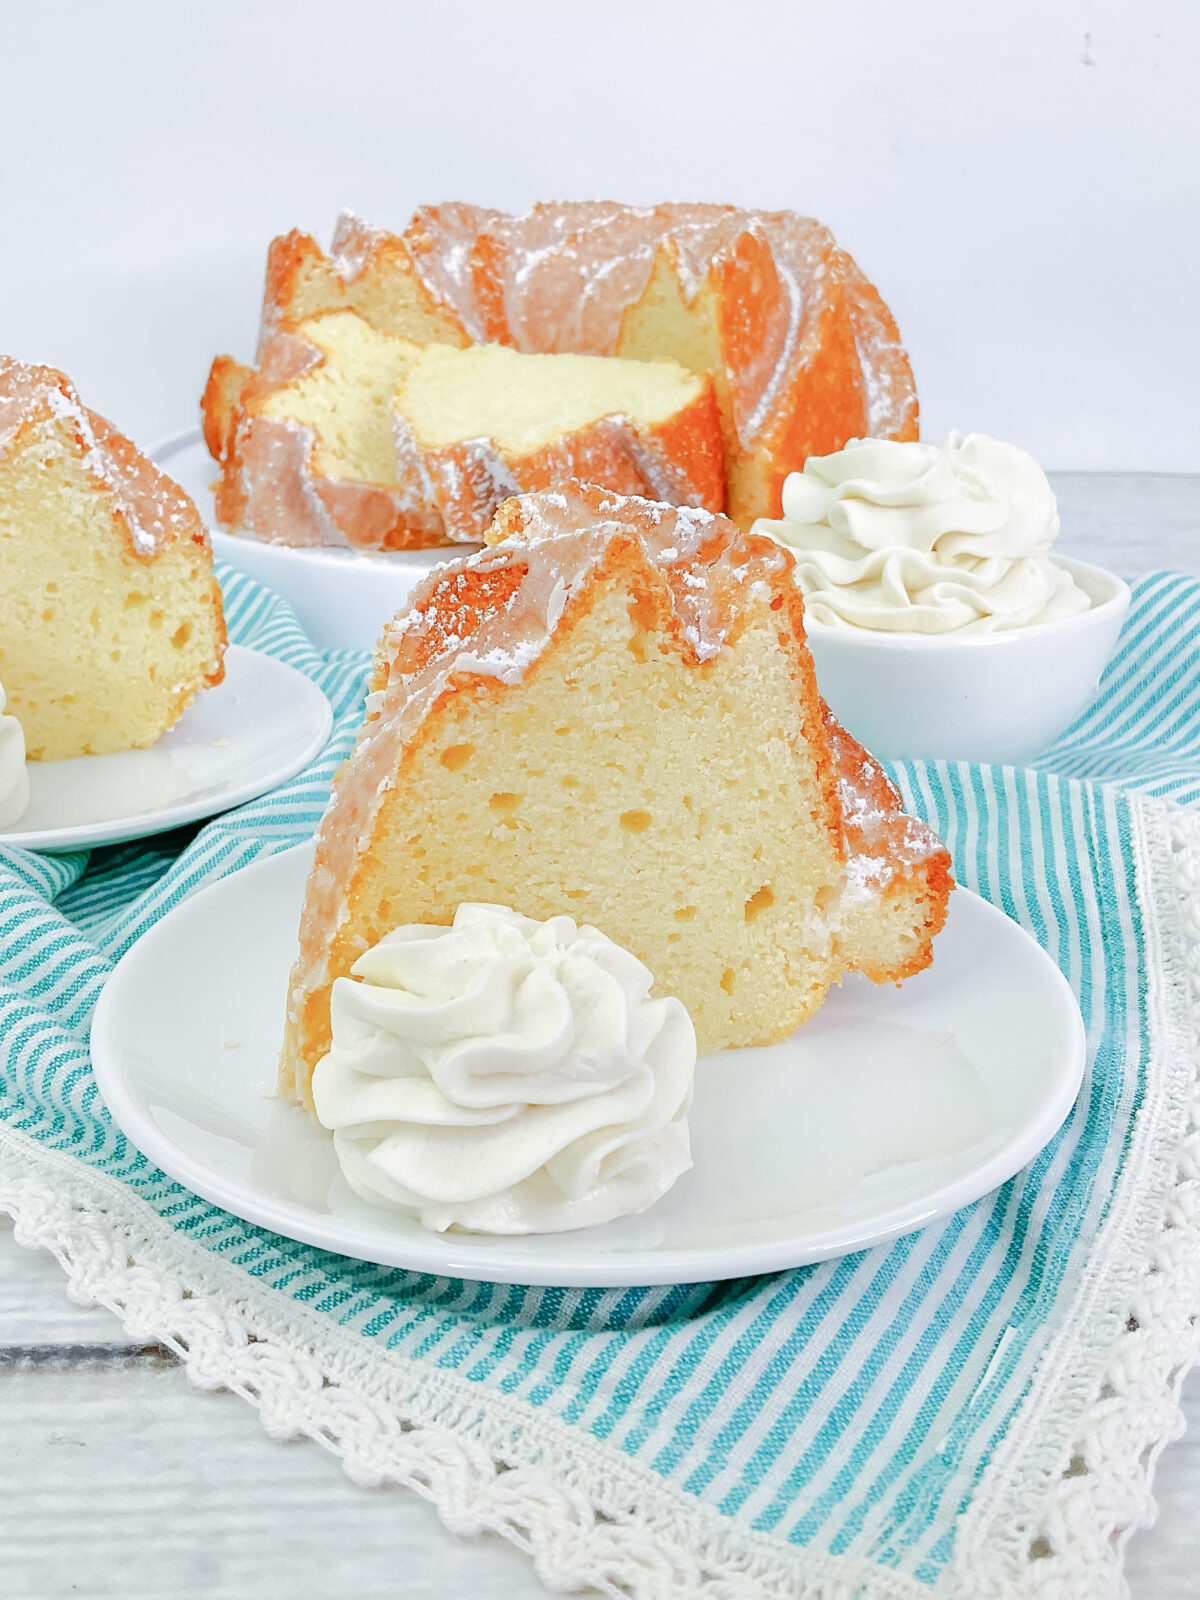 Indulge in a timeless favourite with this vintage-inspired Whipped Cream Pound Cake Recipe! Whip up this special treat for any occasion!